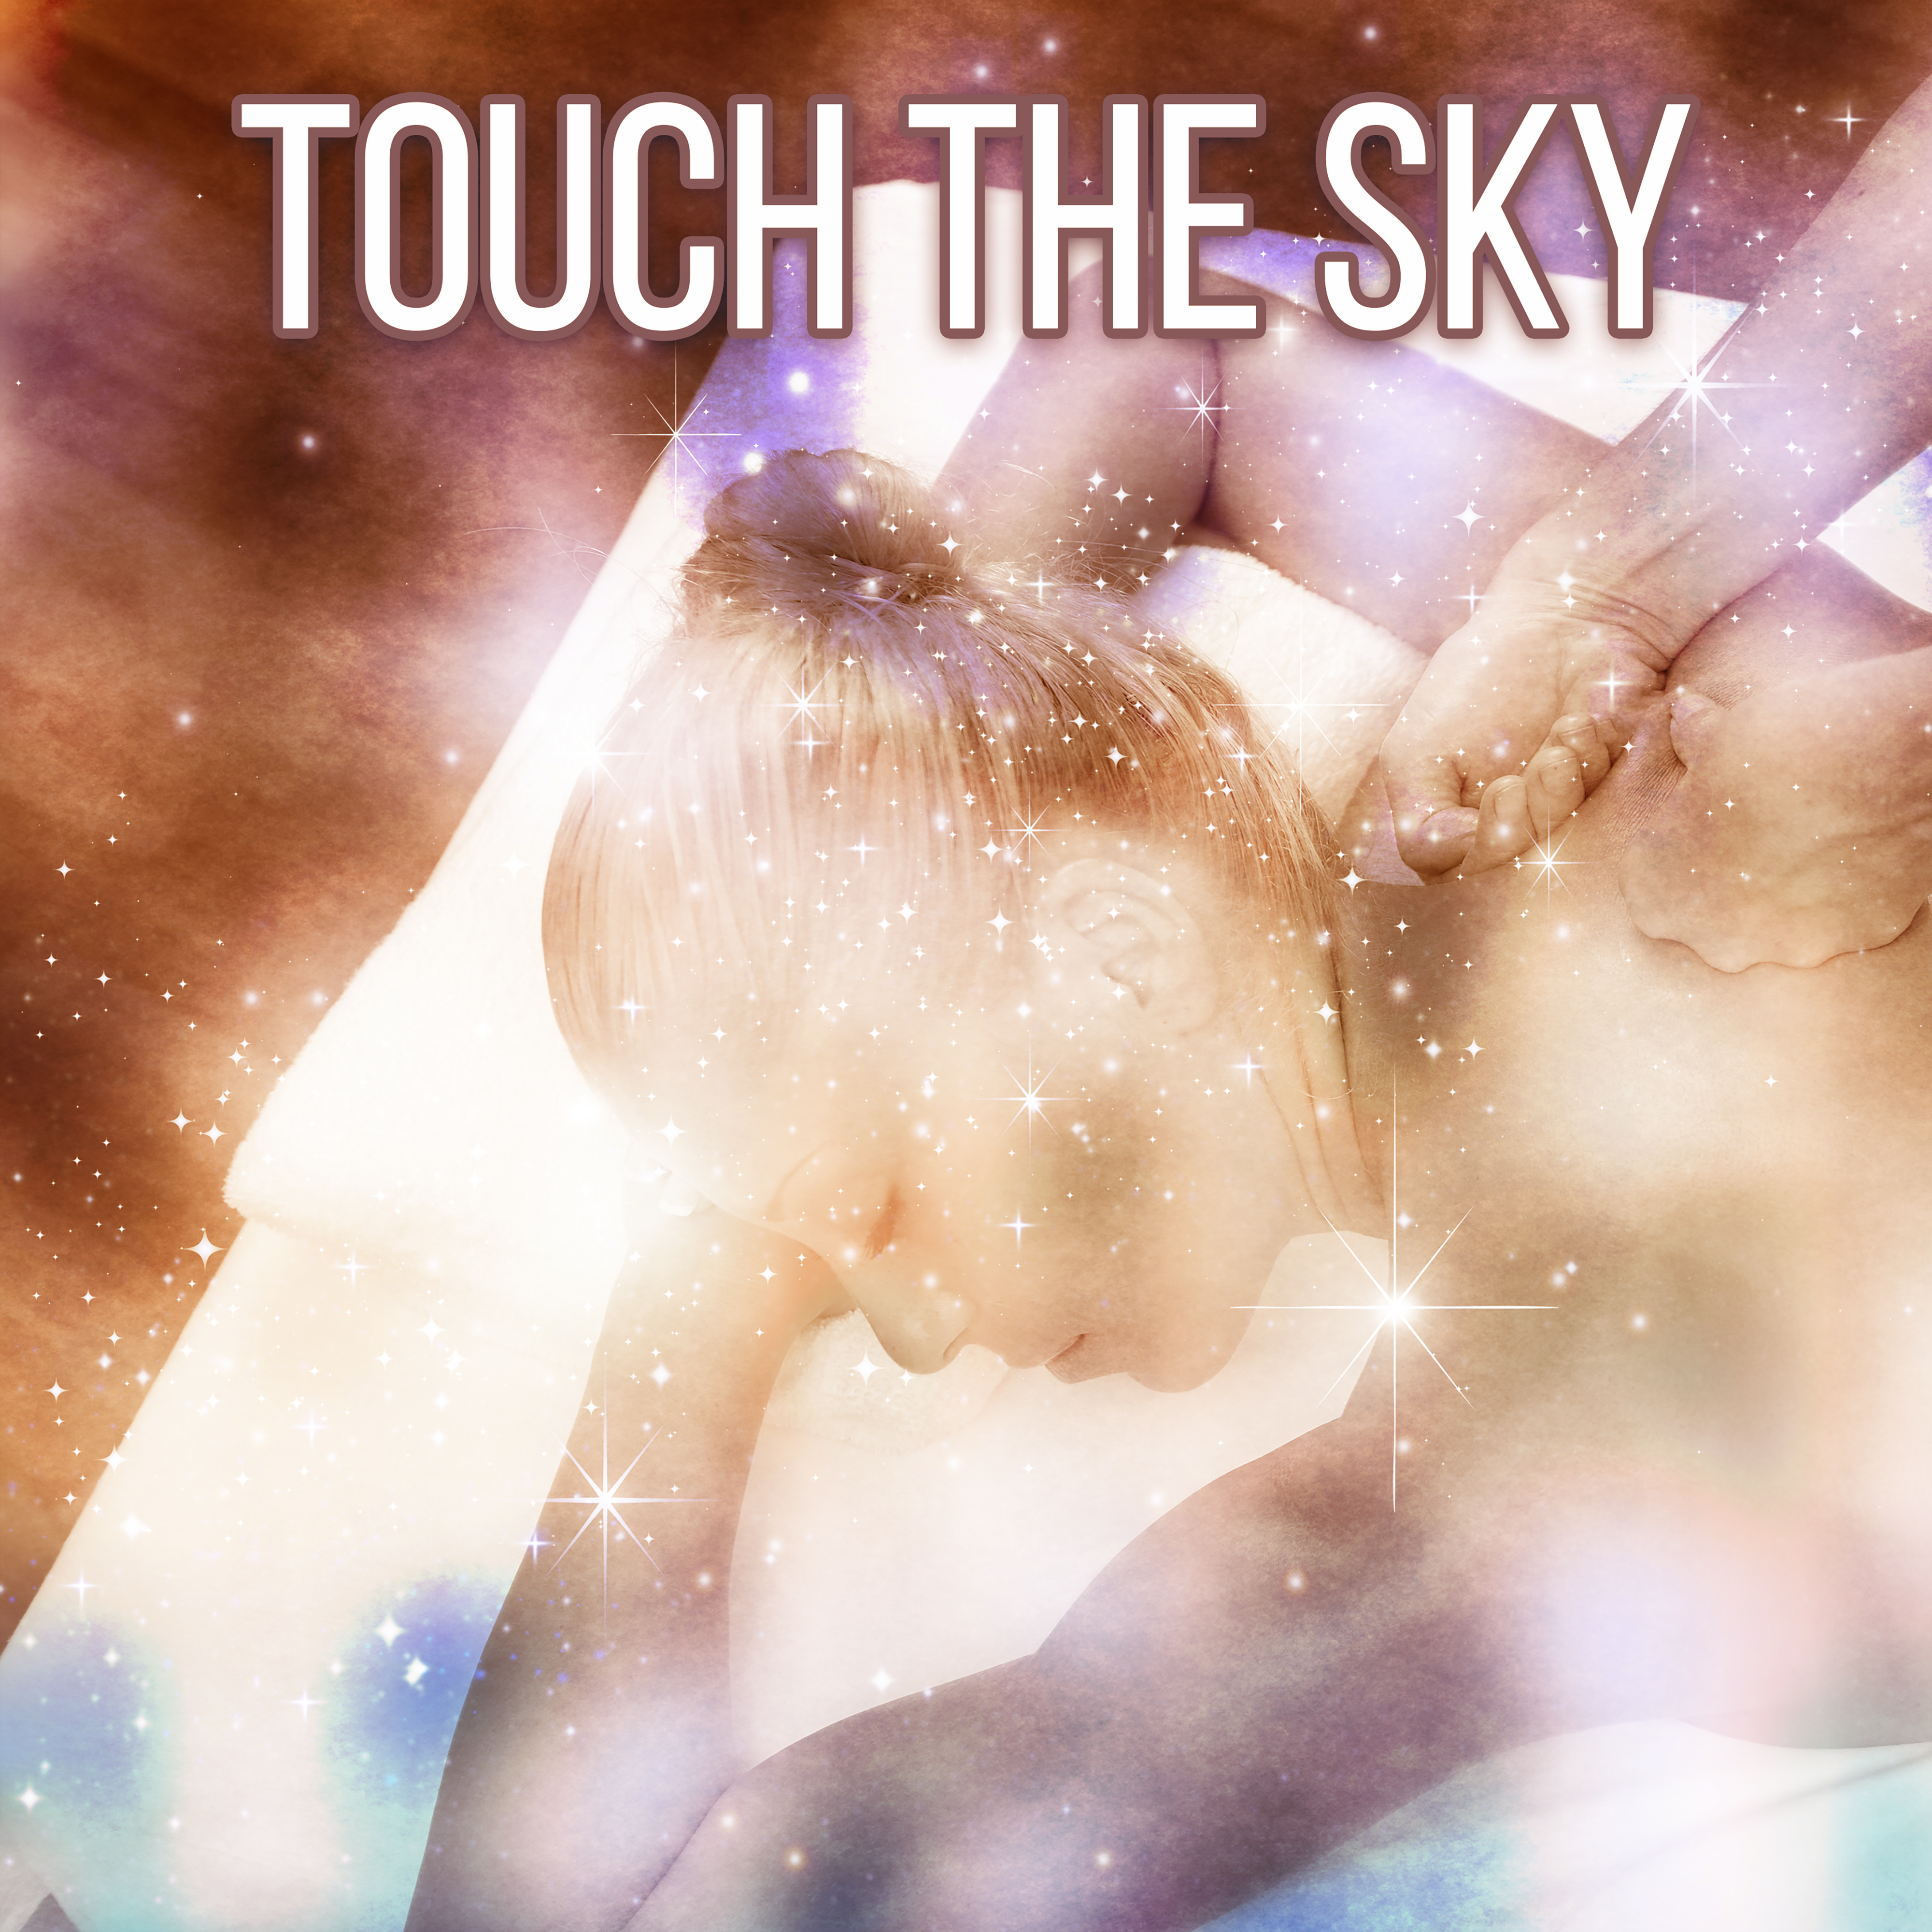 Touch the Sky  Relaxation Wellness, Spa Dreams, Soft Melodies for Rest, Wellness Sounds, Gentle Music for Soul